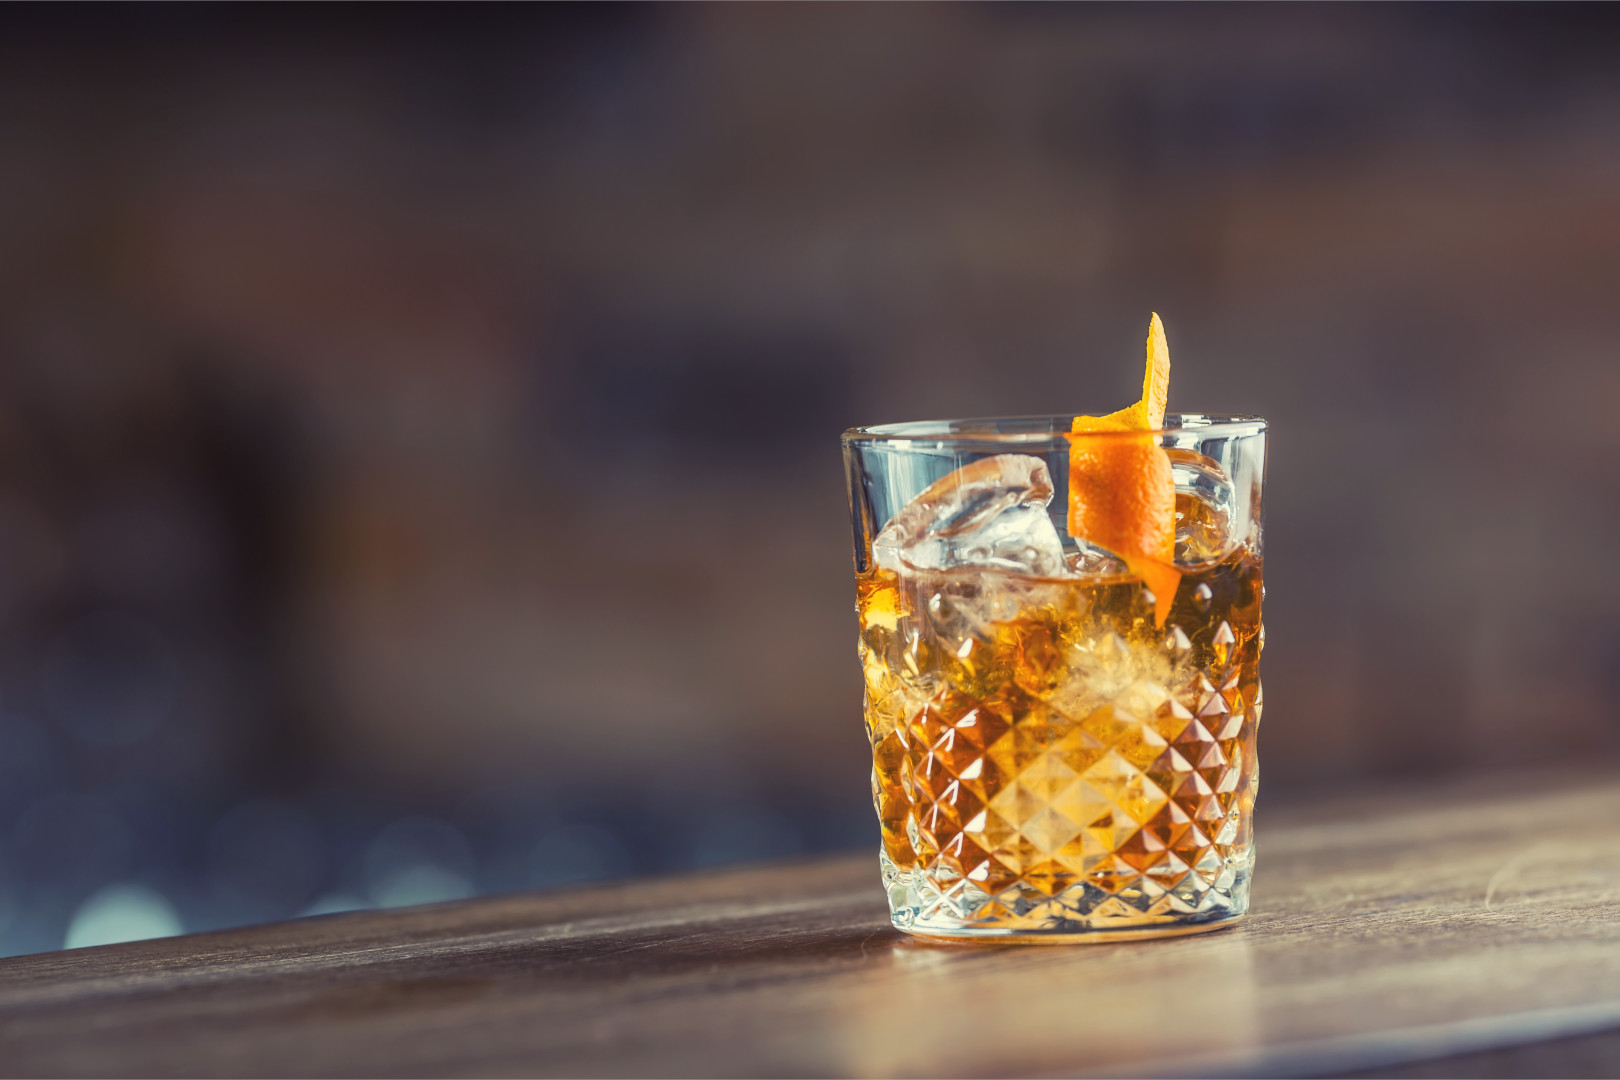 An old-fashioned with twisted orange peel sitting on a wooden bar